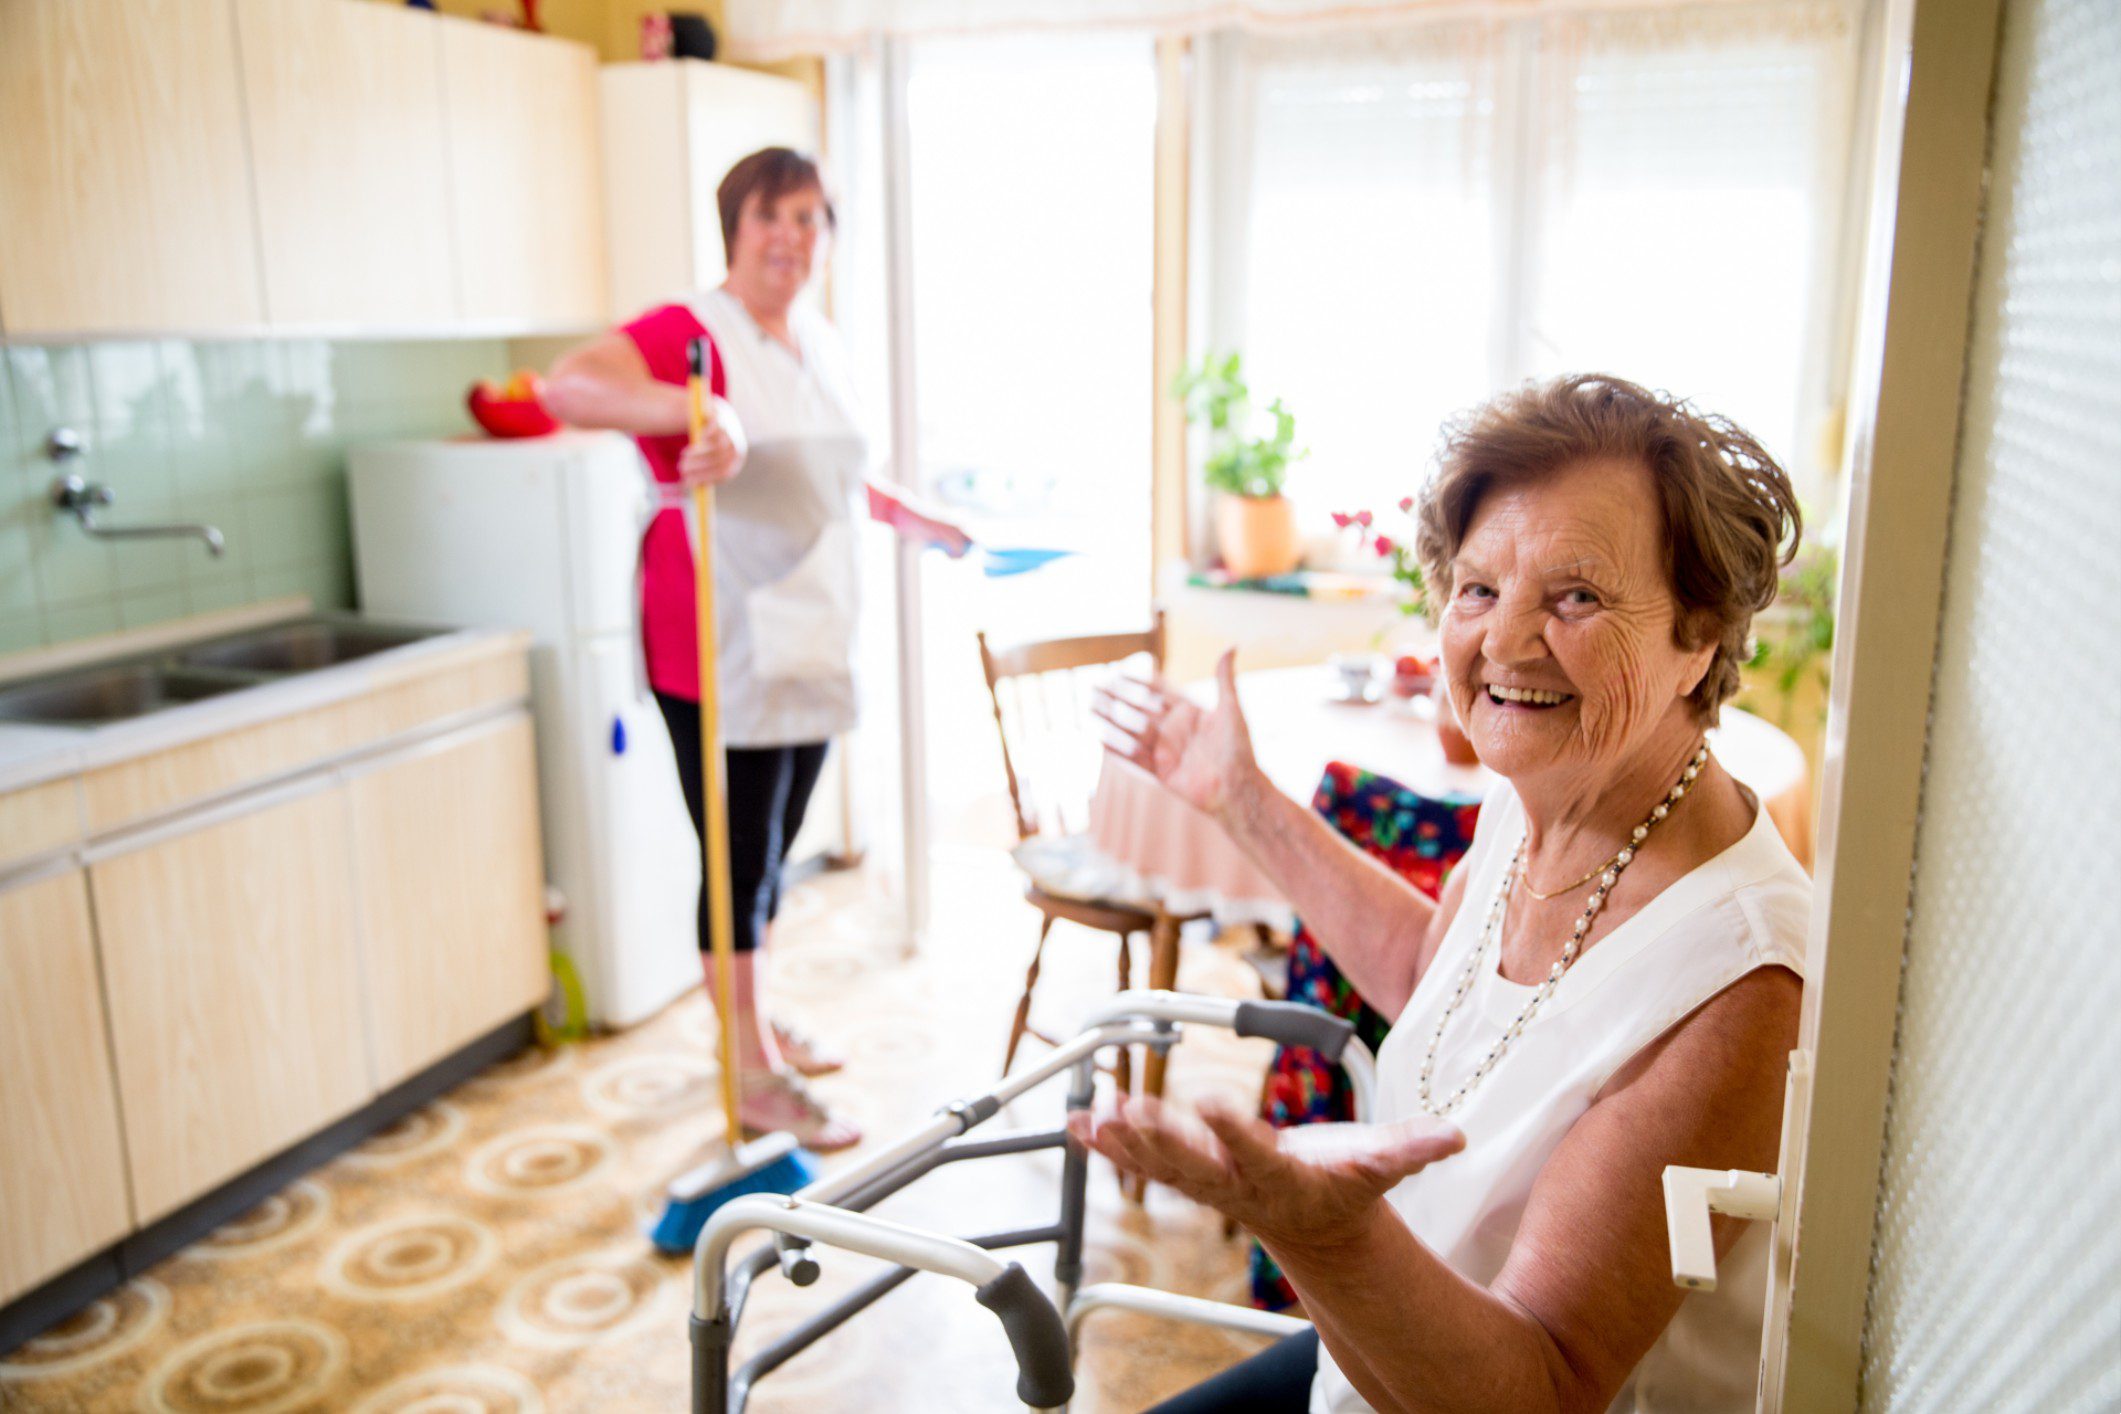 Aged care worker registration scheme set to be introduced in 2023